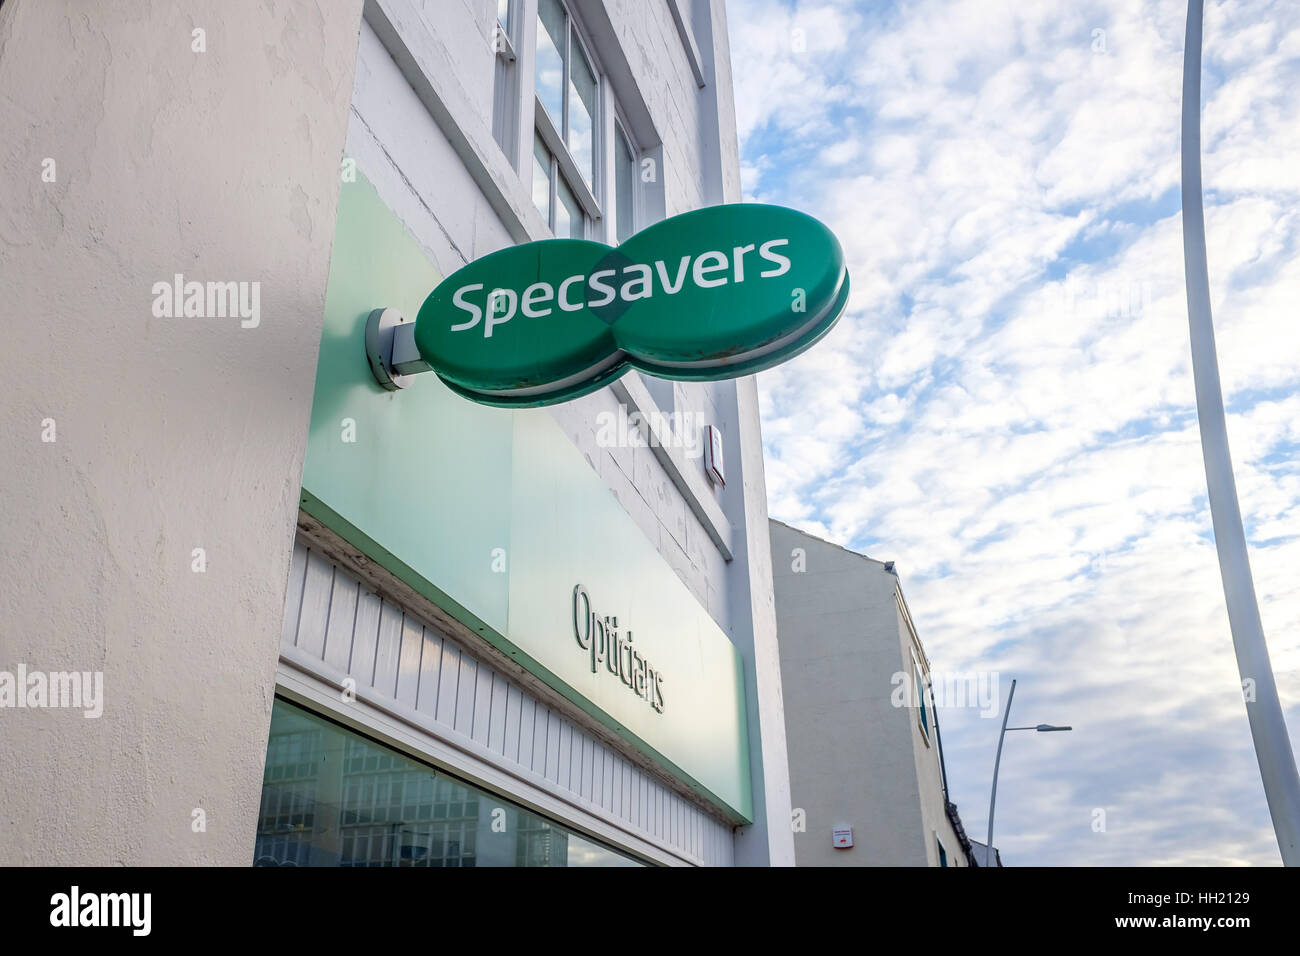 Specsavers Sign Barrow in Furness Stock Photo